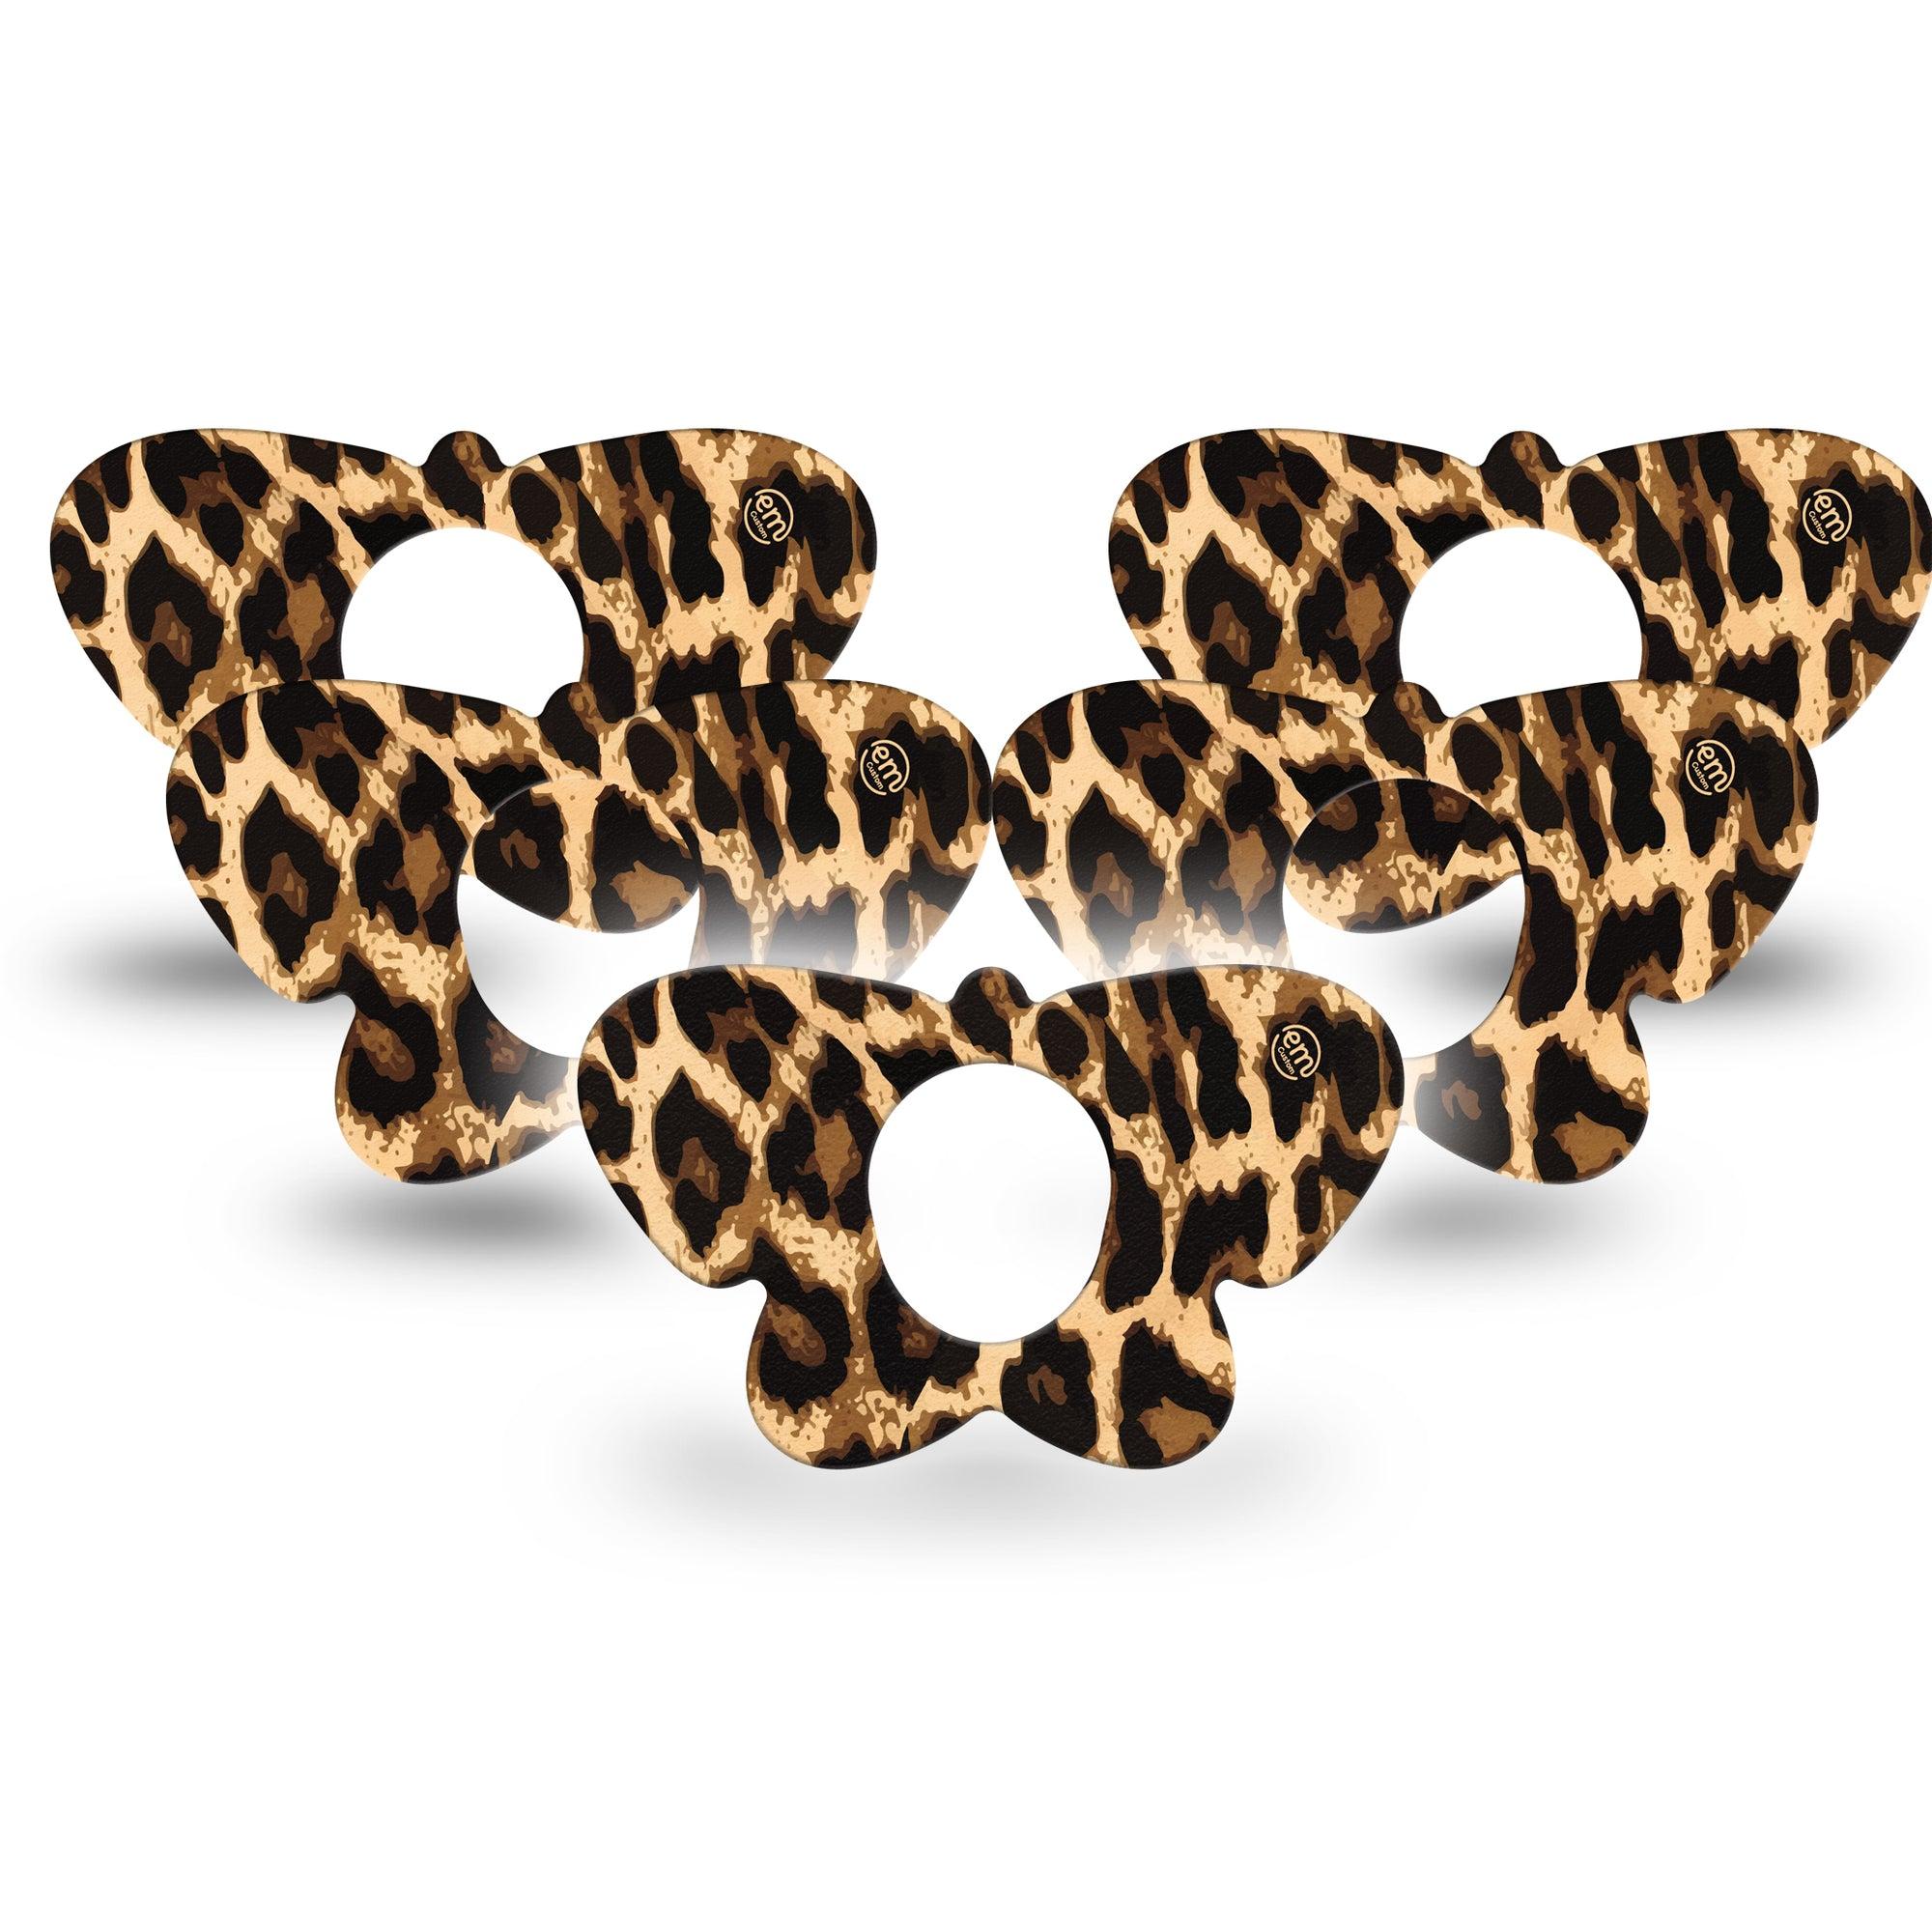 ExpressionMed Leopard Print Butterfly Dexcom G7 Tape, 5-Pack, Brown Animal Print Themed, CGM Plaster Patch Design